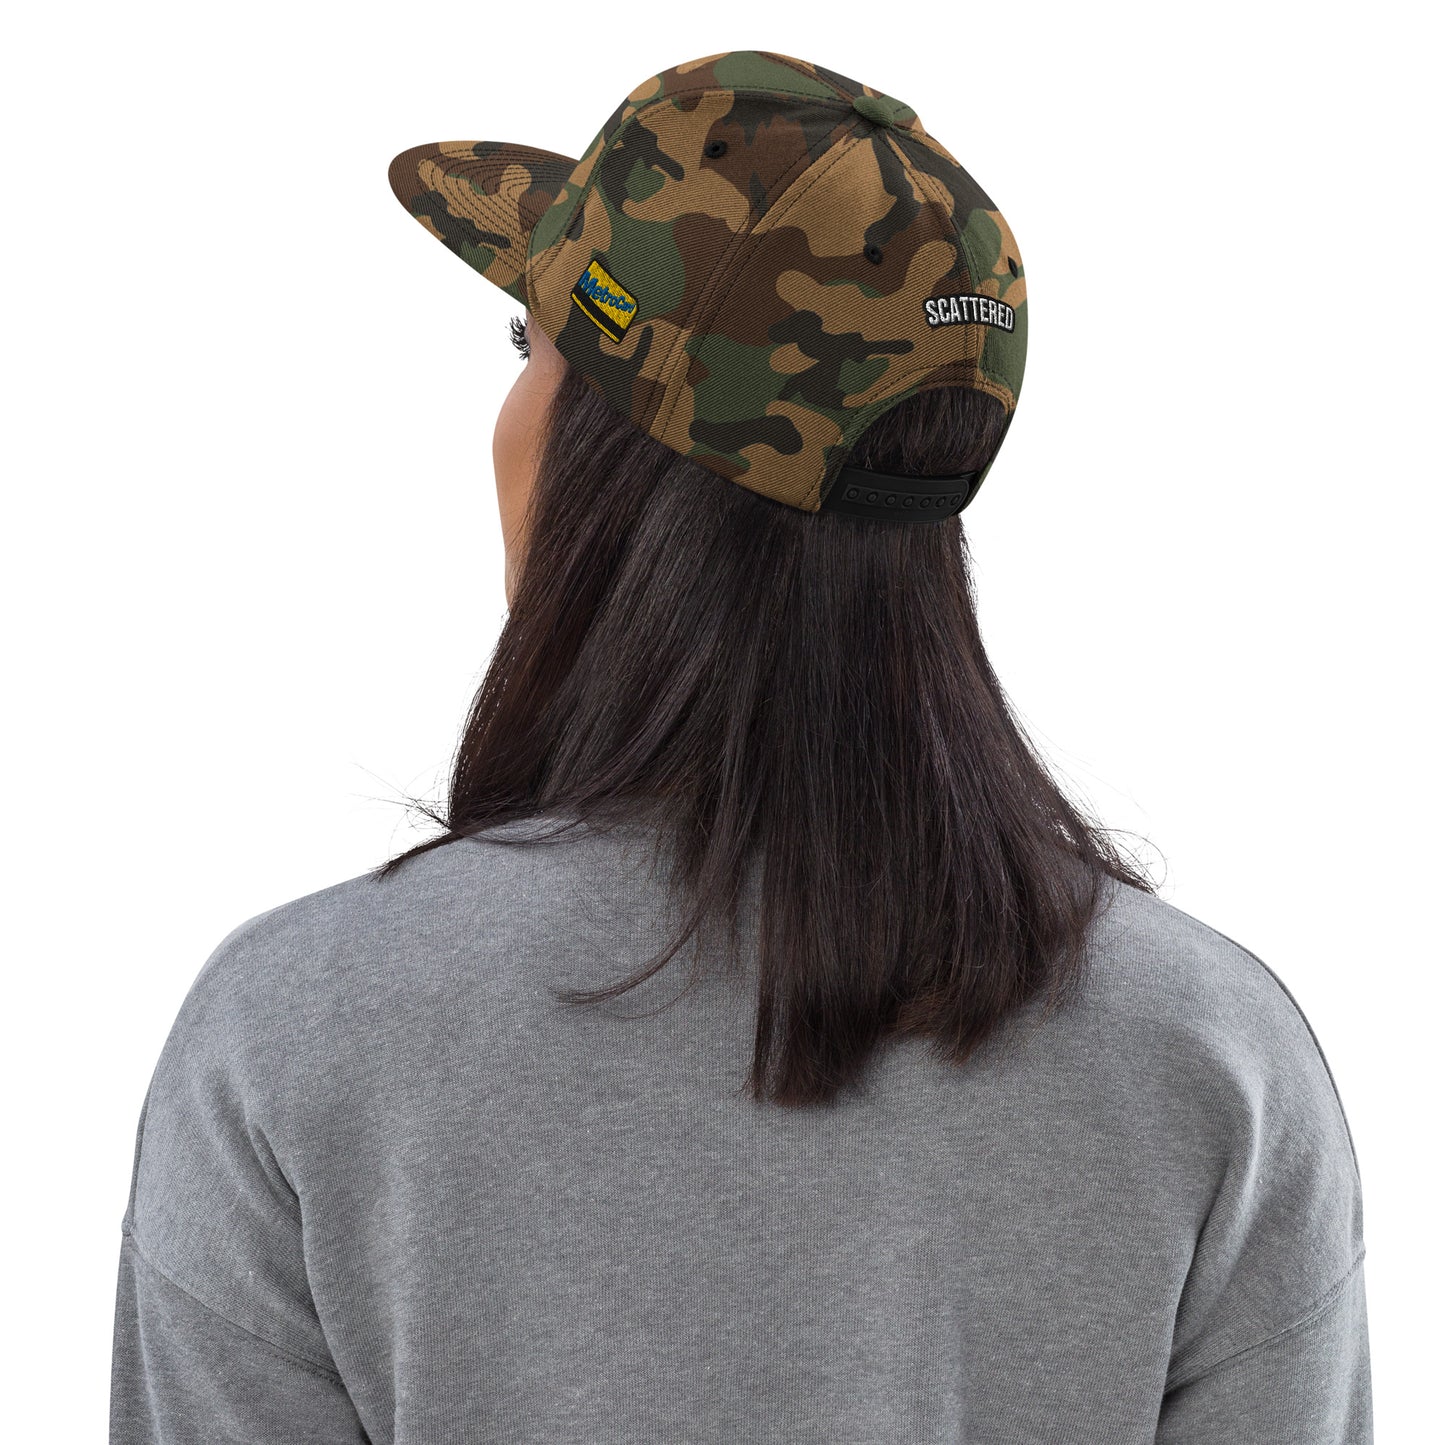 New York Apple Logo Embroidered Camo Snapback Hat (Metro Card) Scattered Streetwear